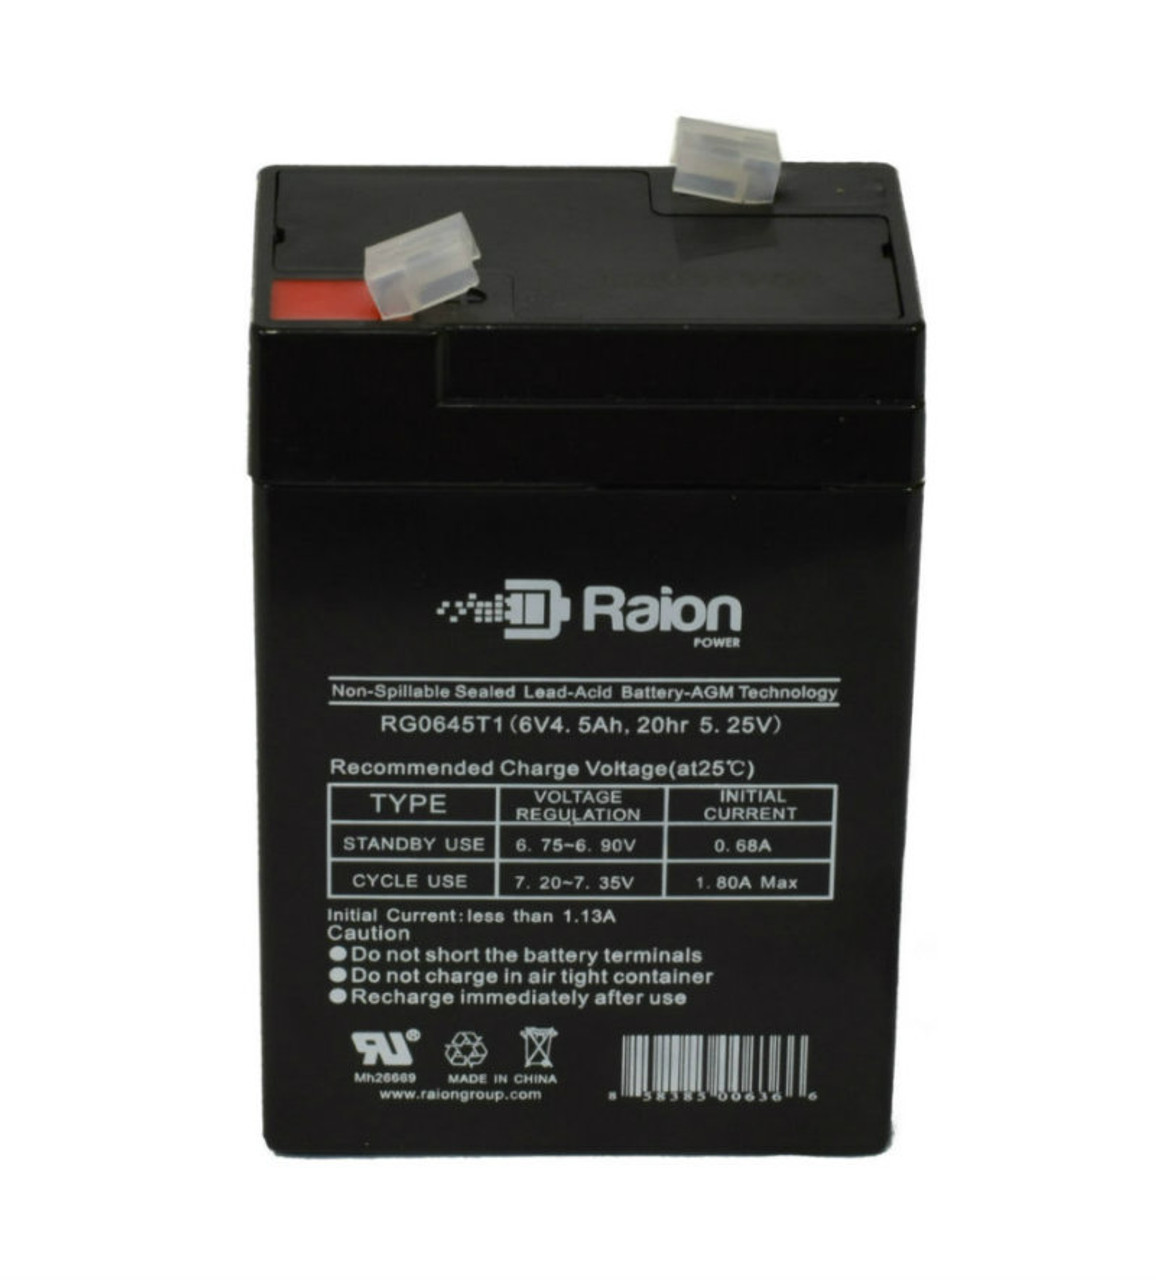 Raion Power RG0645T1 Replacement Battery Cartridge for Peg Perego ED1026 6V Star Princess